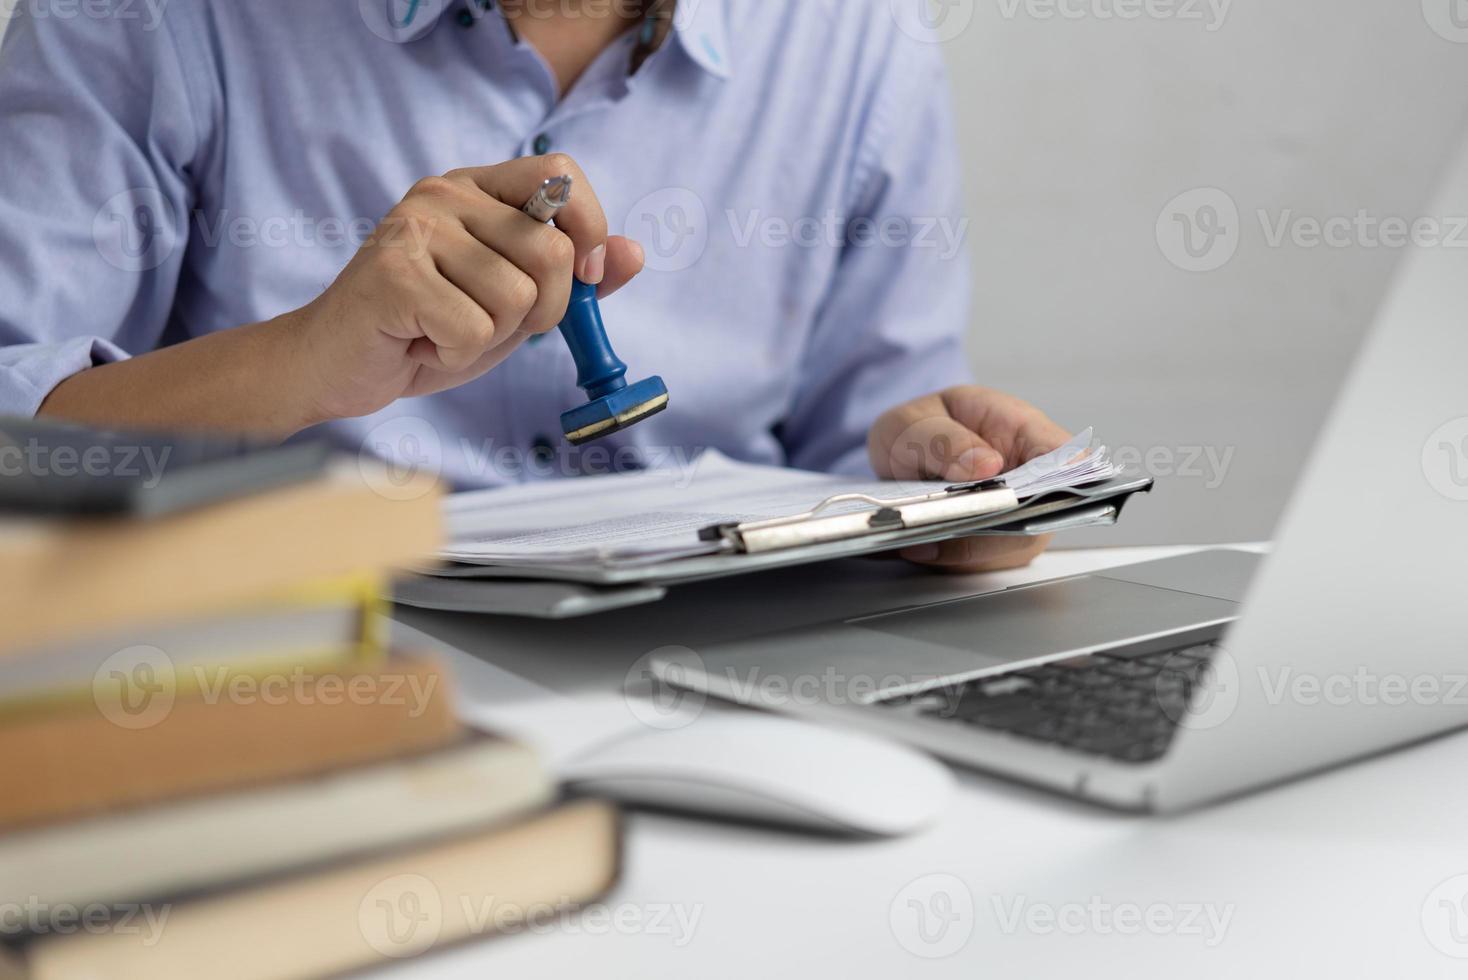 Man stamping approval of work finance banking or investment marketing documents on desk. photo